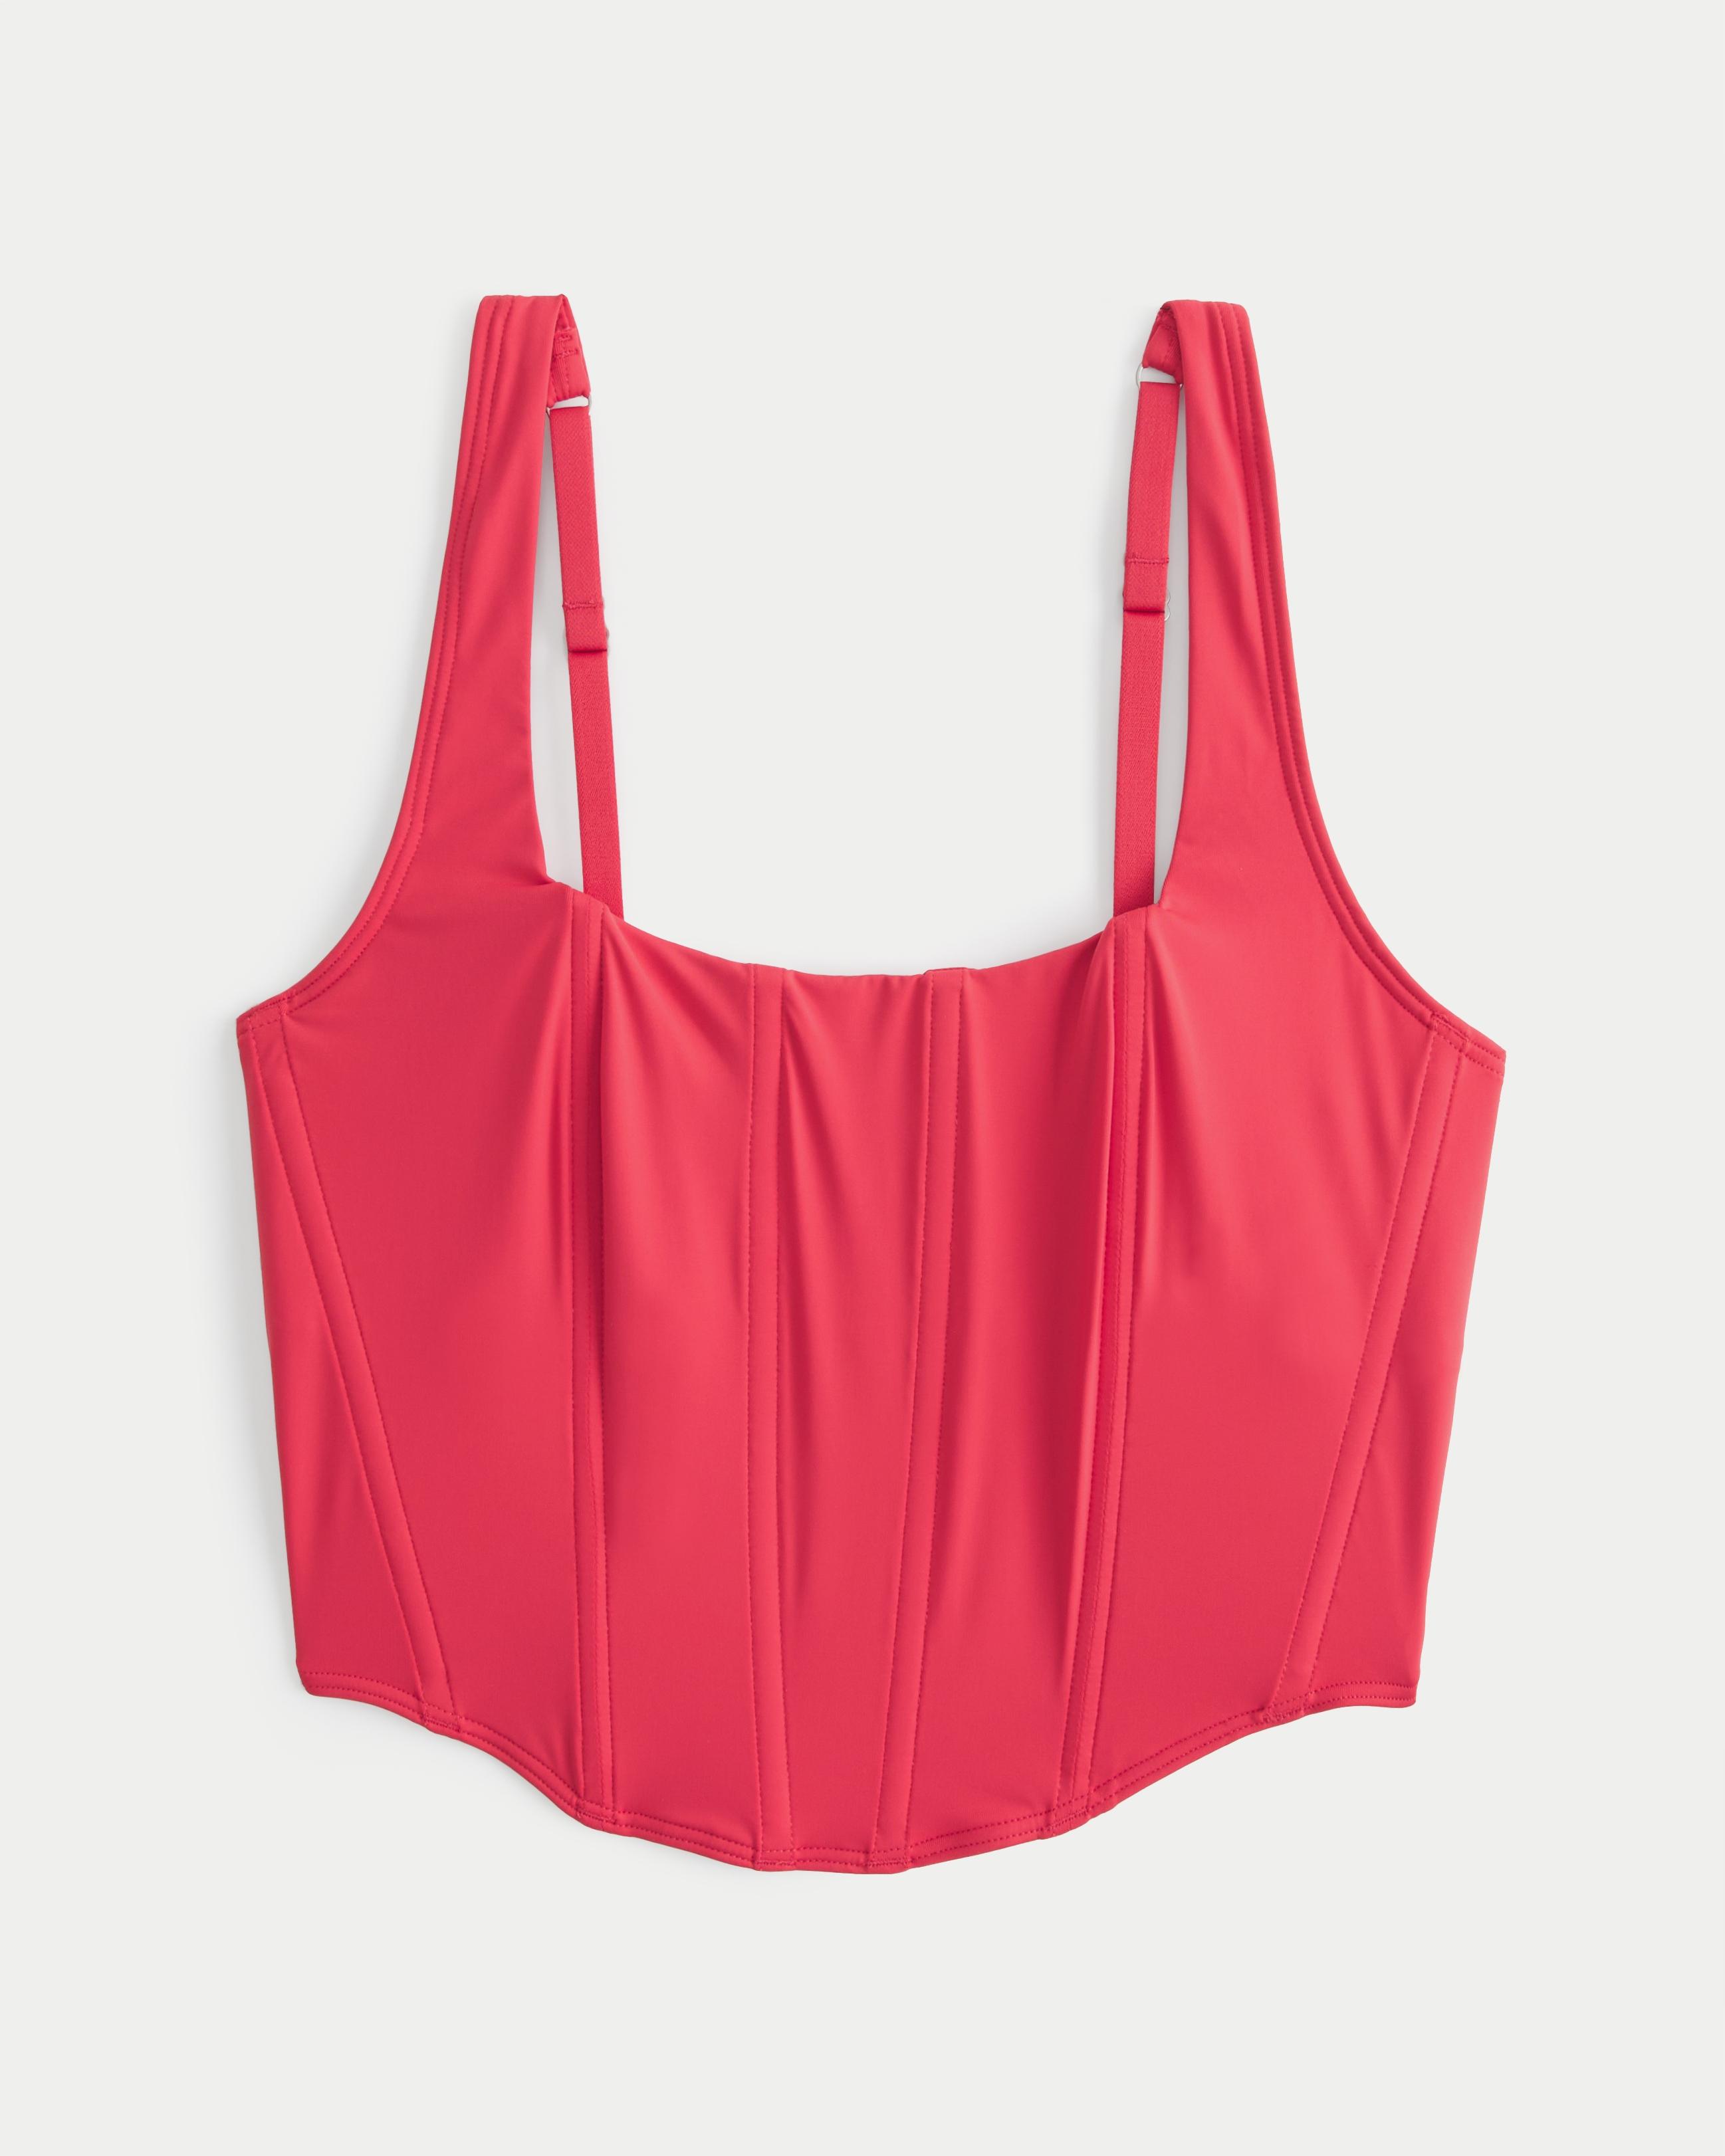 Hollister Gilly Hicks Micro Corset in Pink